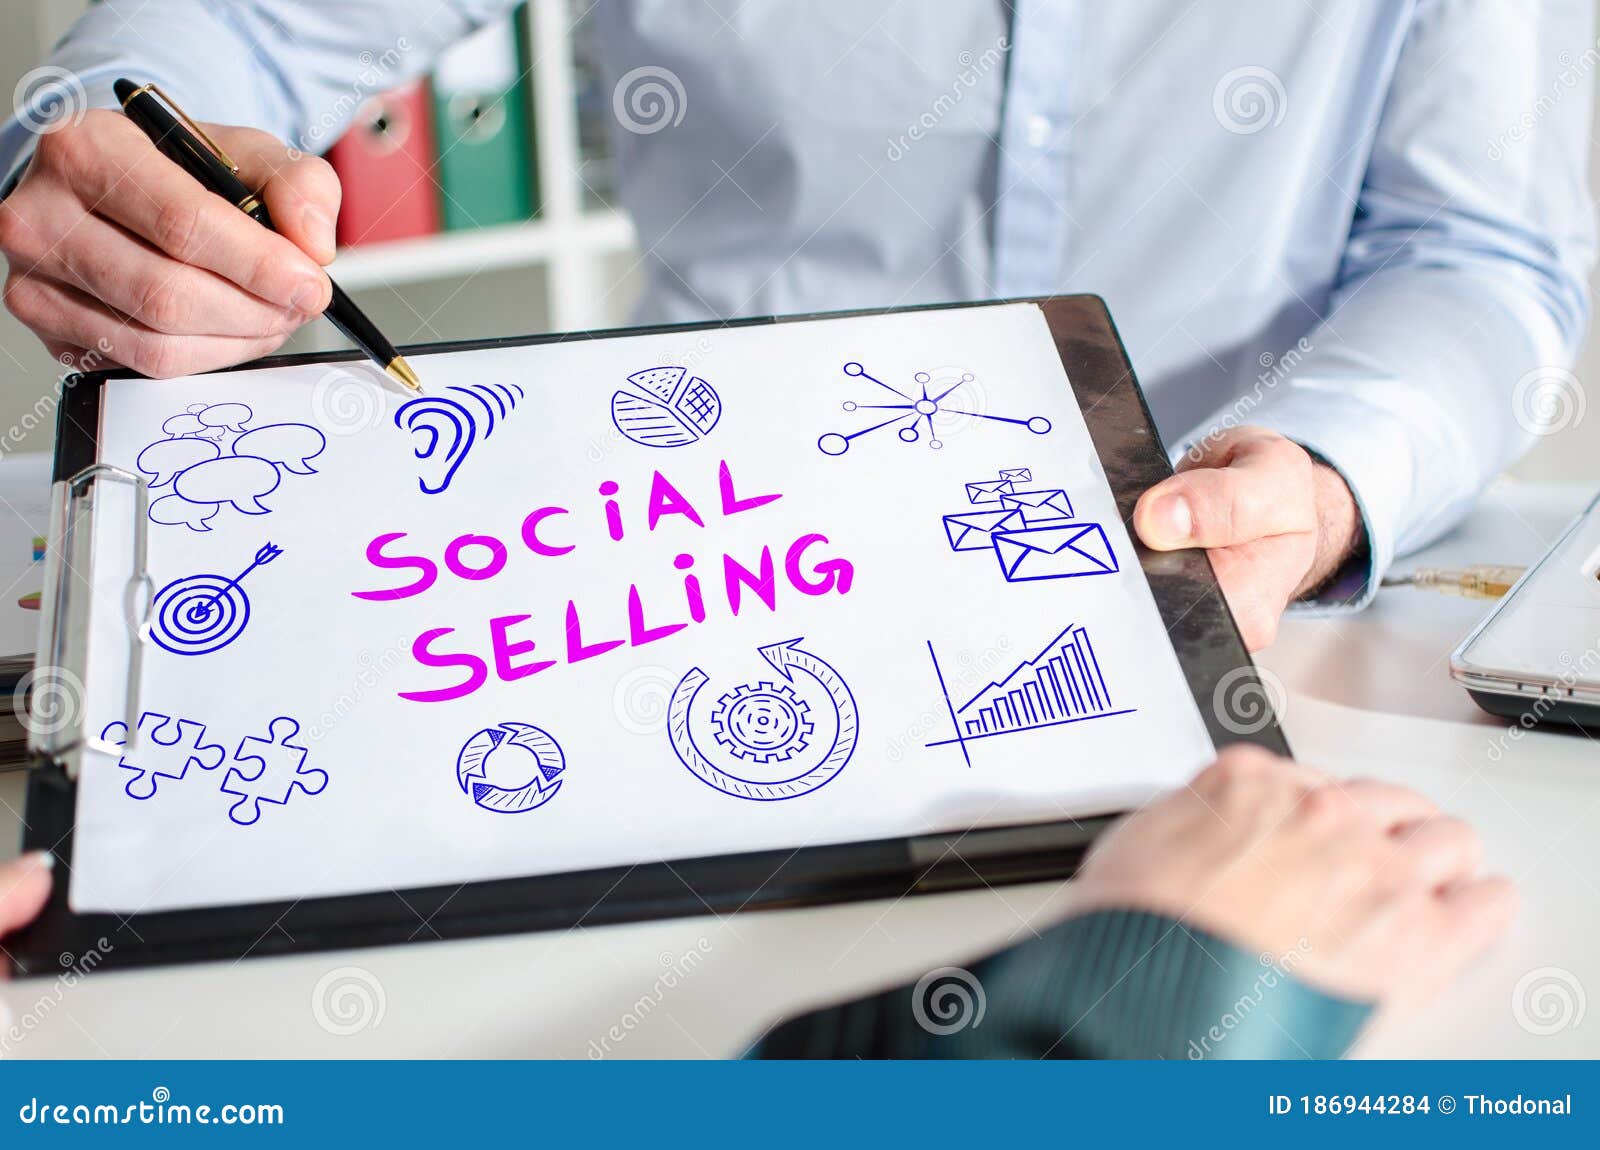 social selling concept on a clipboard